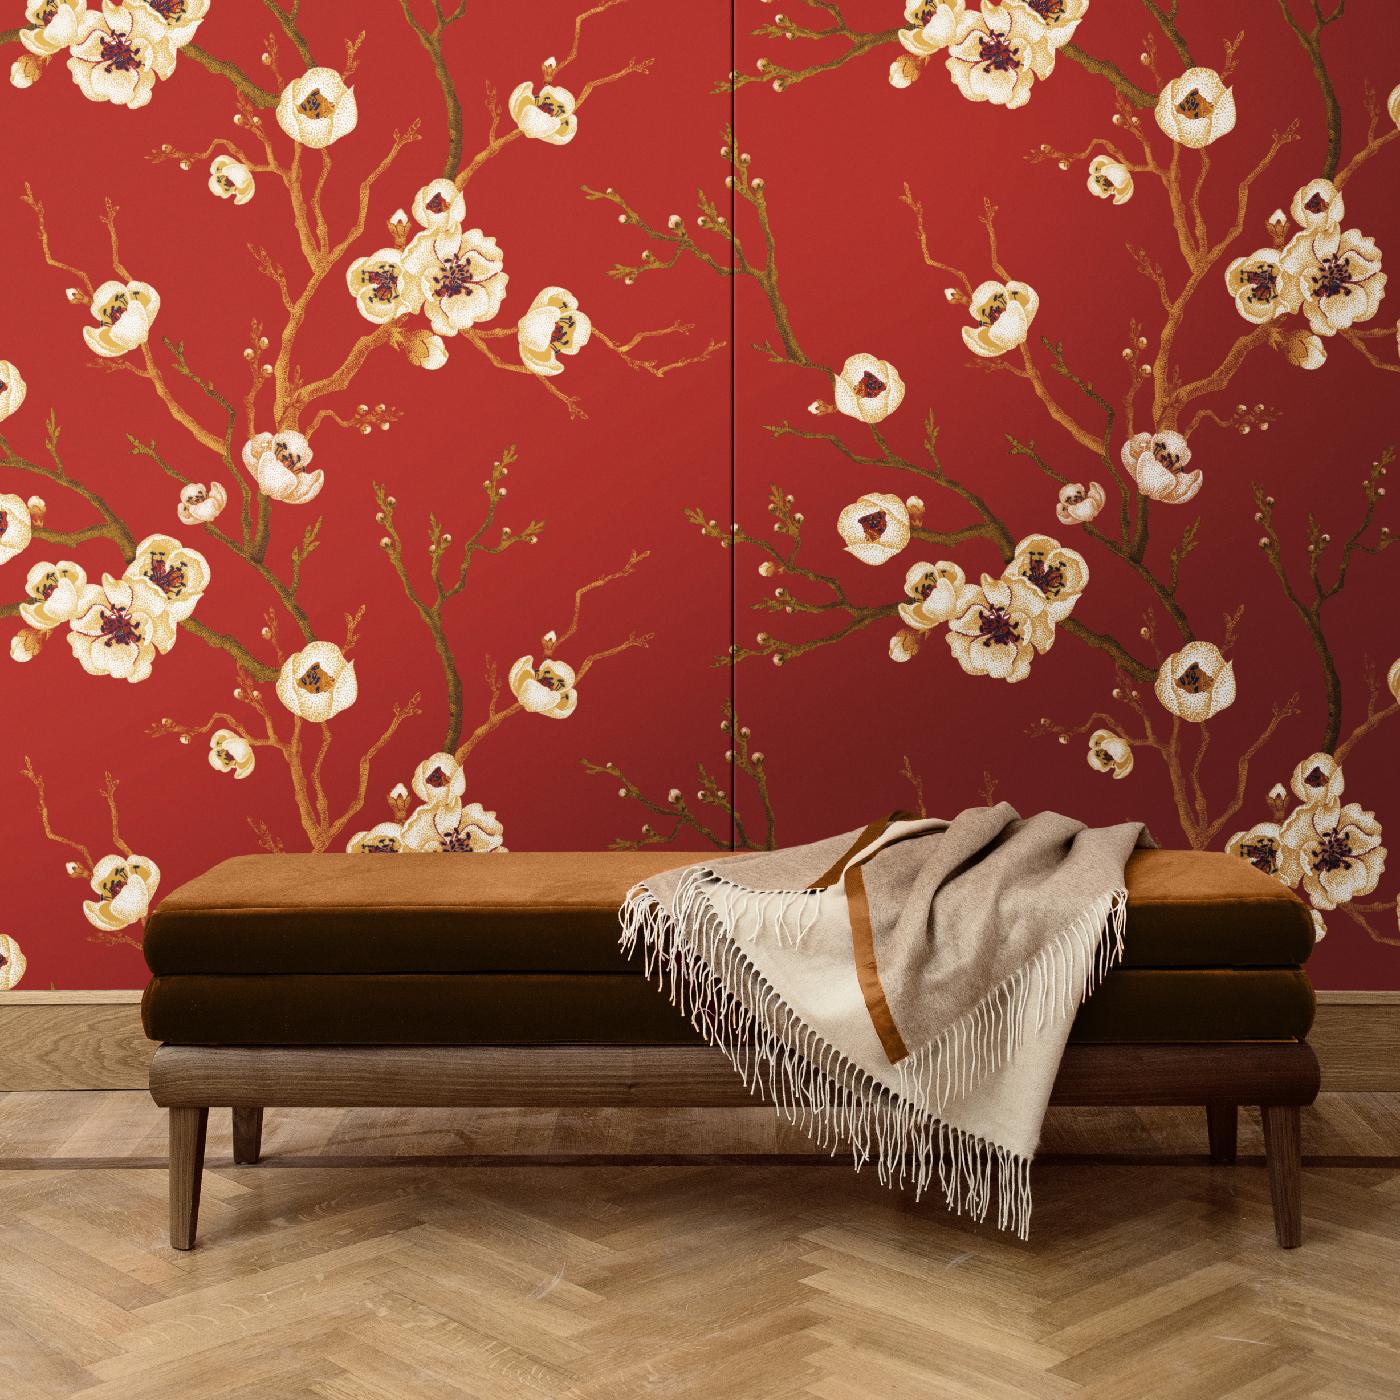 Part of a series of cherry blossom wall covering that will add a precious and timeless decoration to any interior, this piece is available both as boiserie, with a wood honeycomb structure, and as fabric. Featuring the same design of a vivid red